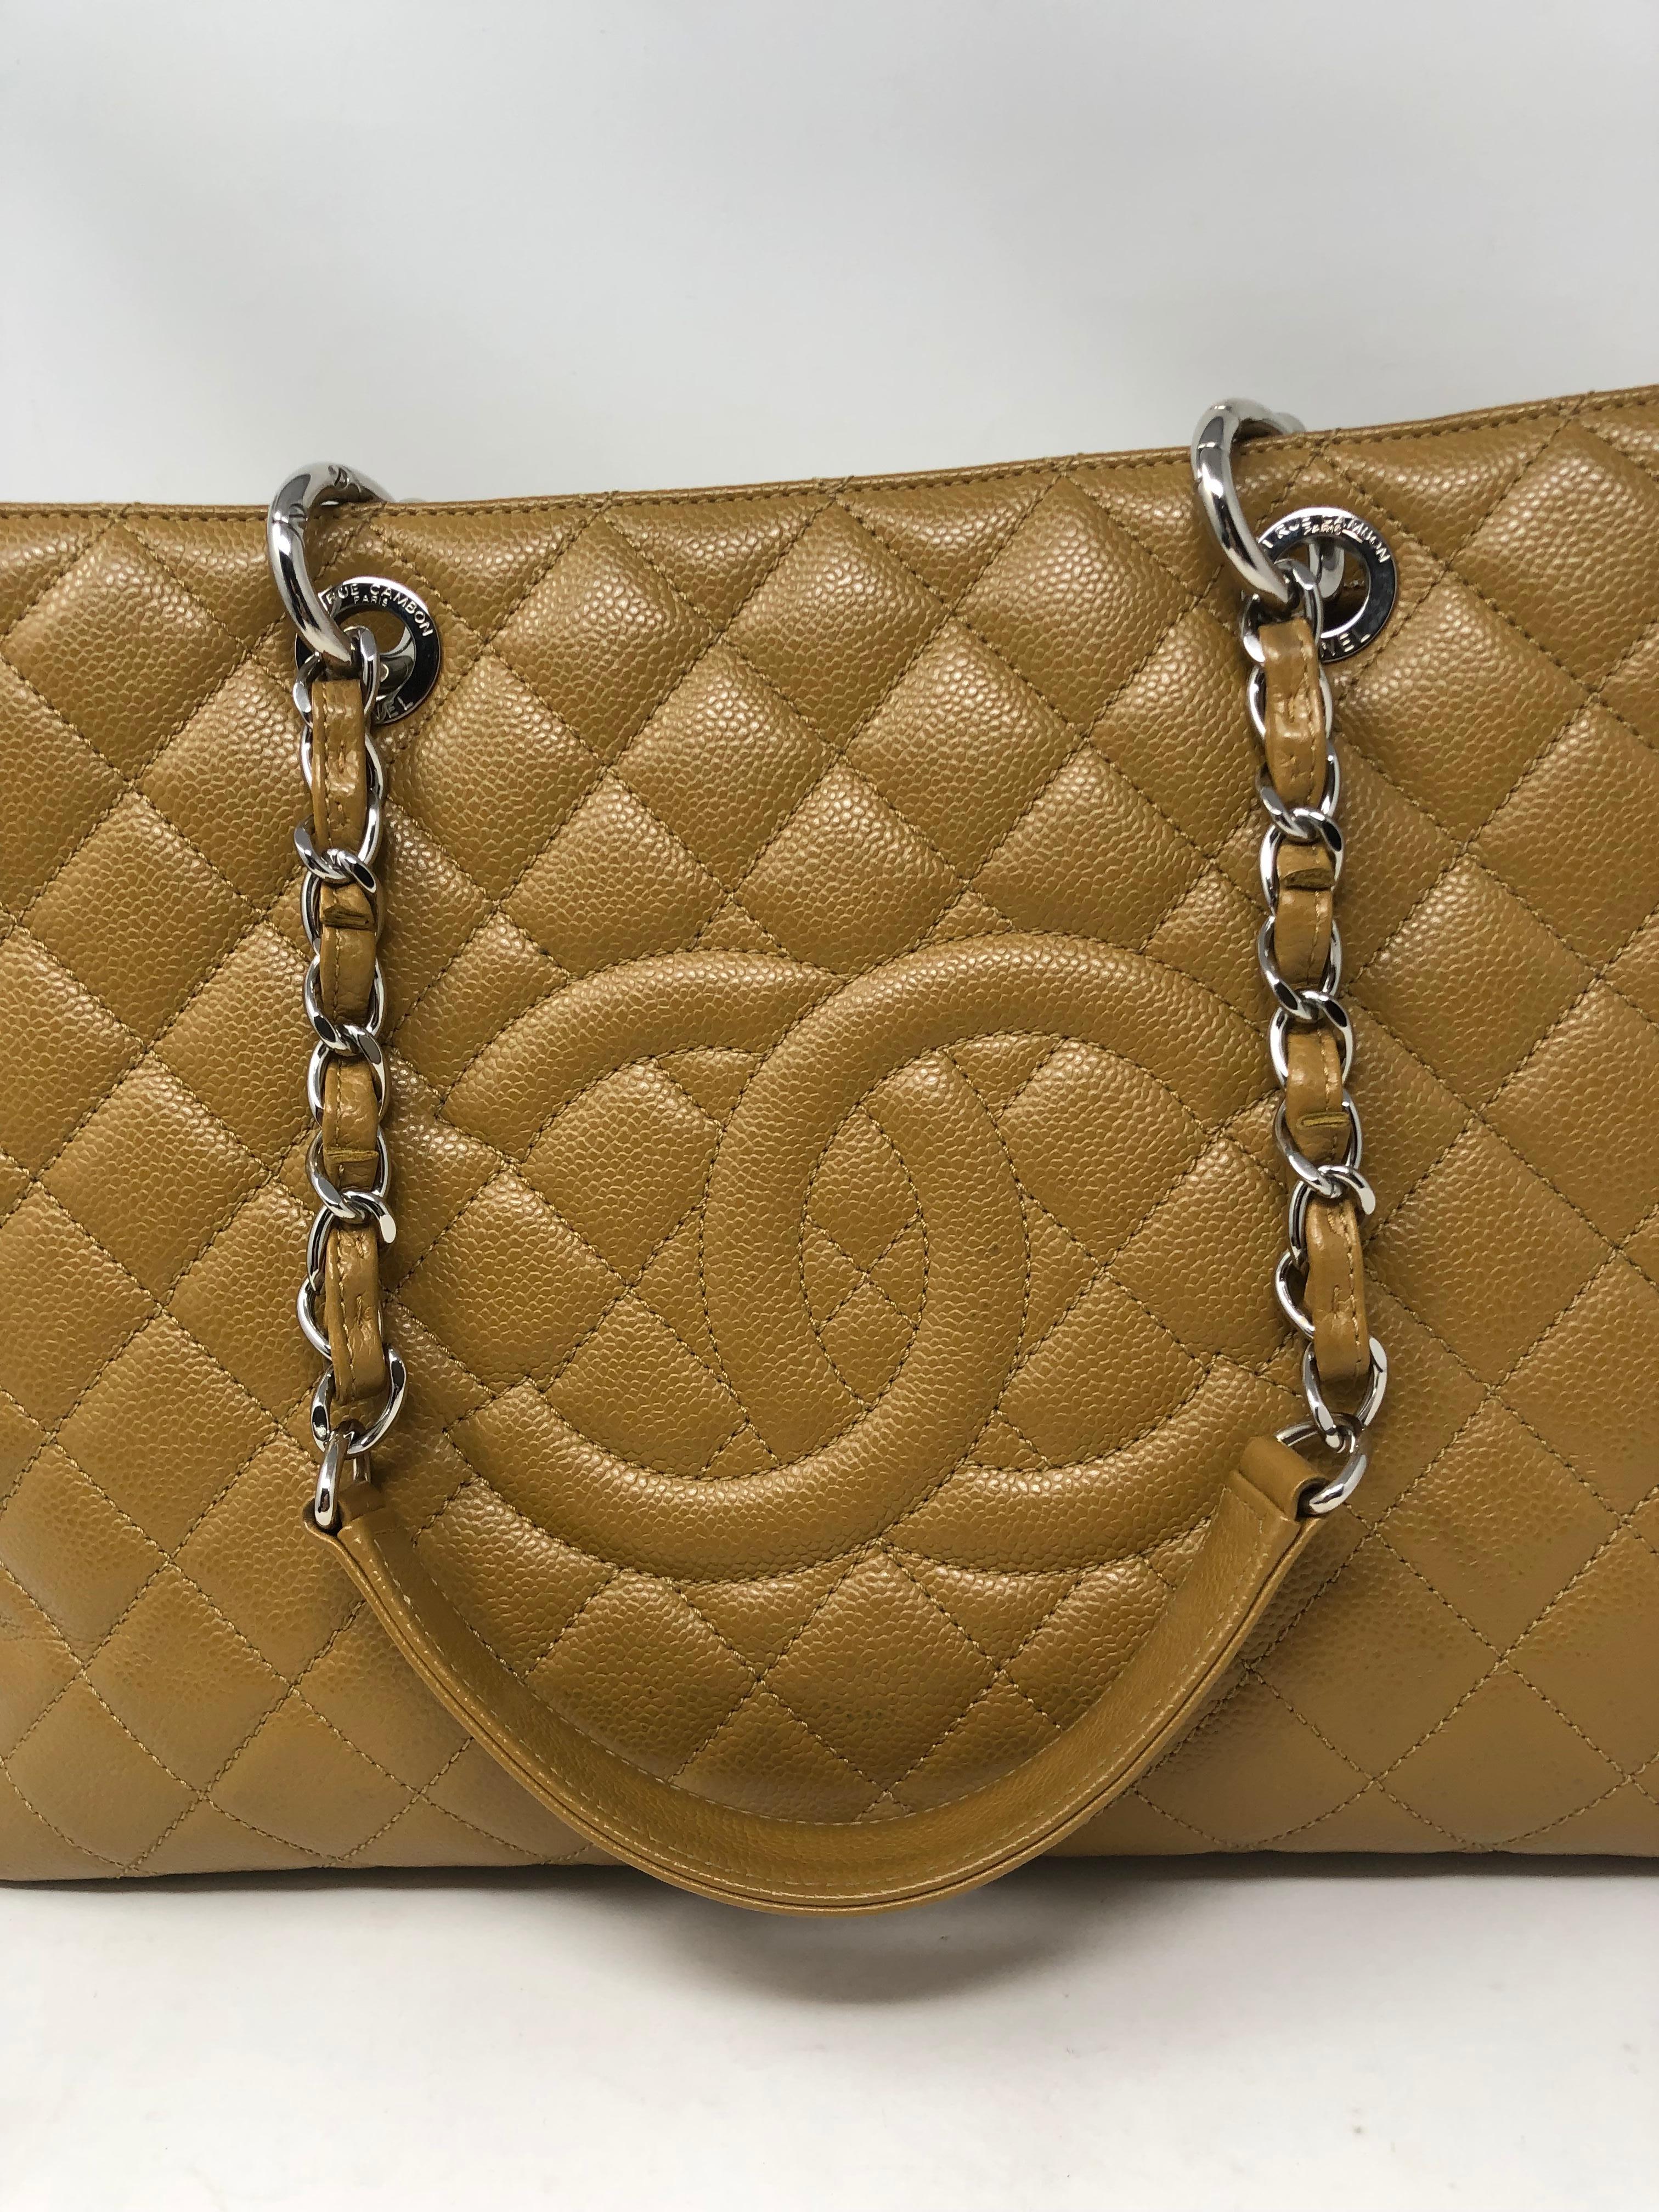 Chanel Tan/ Gold Caviar leather XL Grand Shopper Tote. Retired style from Chanel. This is the largest of the GST Bags. Goldish tan color leather bag is quite neutral. Good condition. Silver hardware. Guaranteed authentic. 